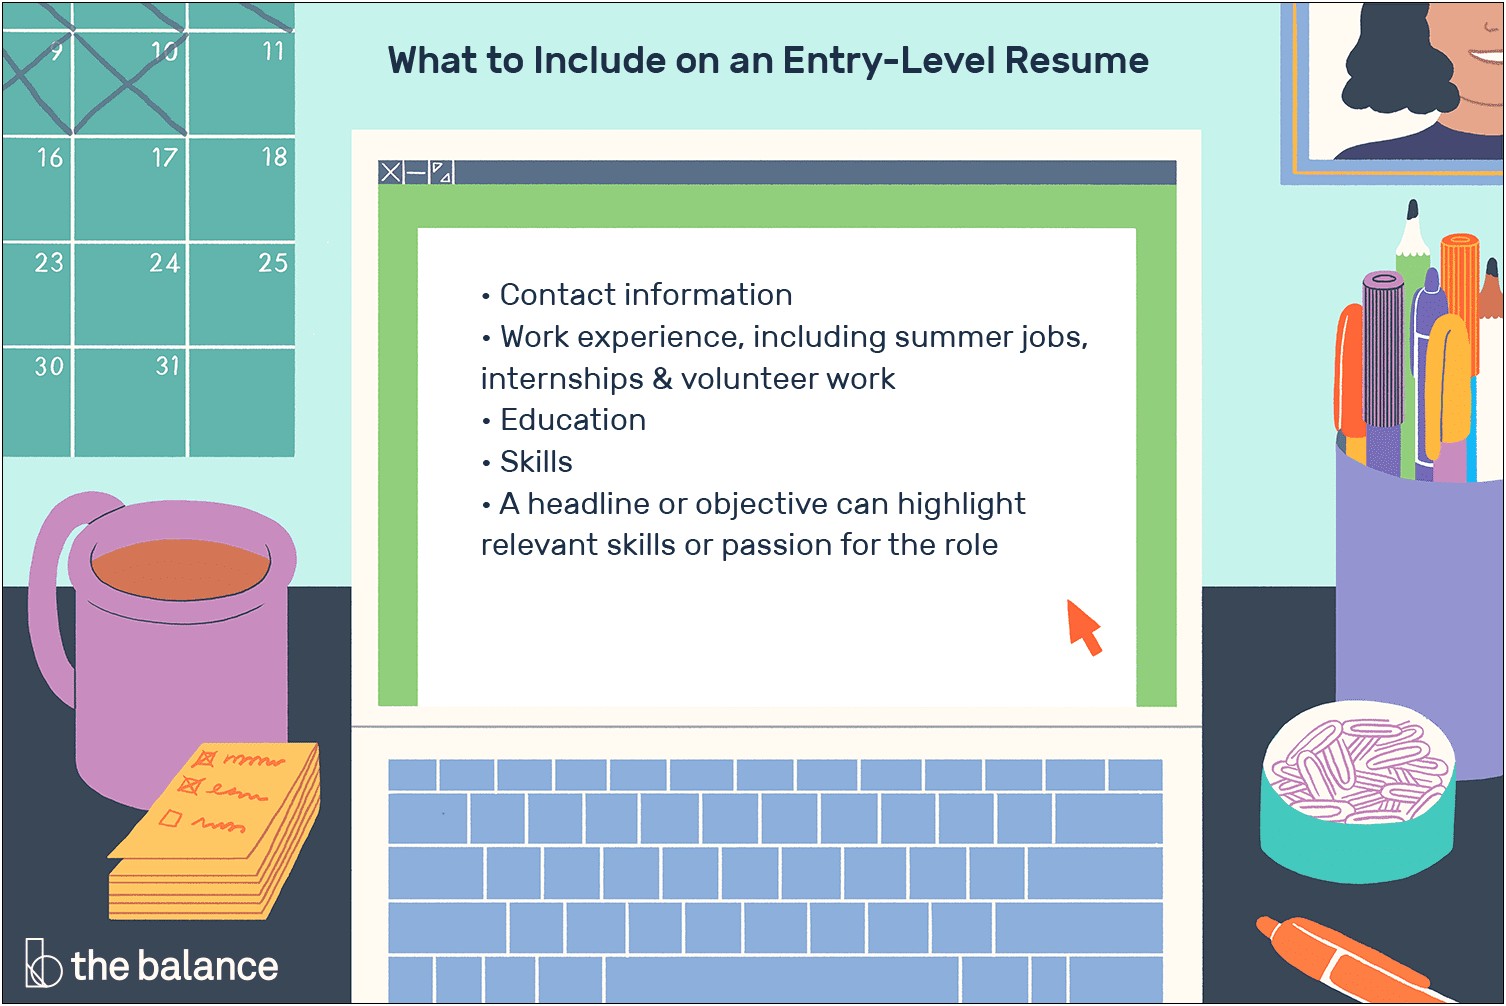 Minimum Length Of Job To Include On Resume